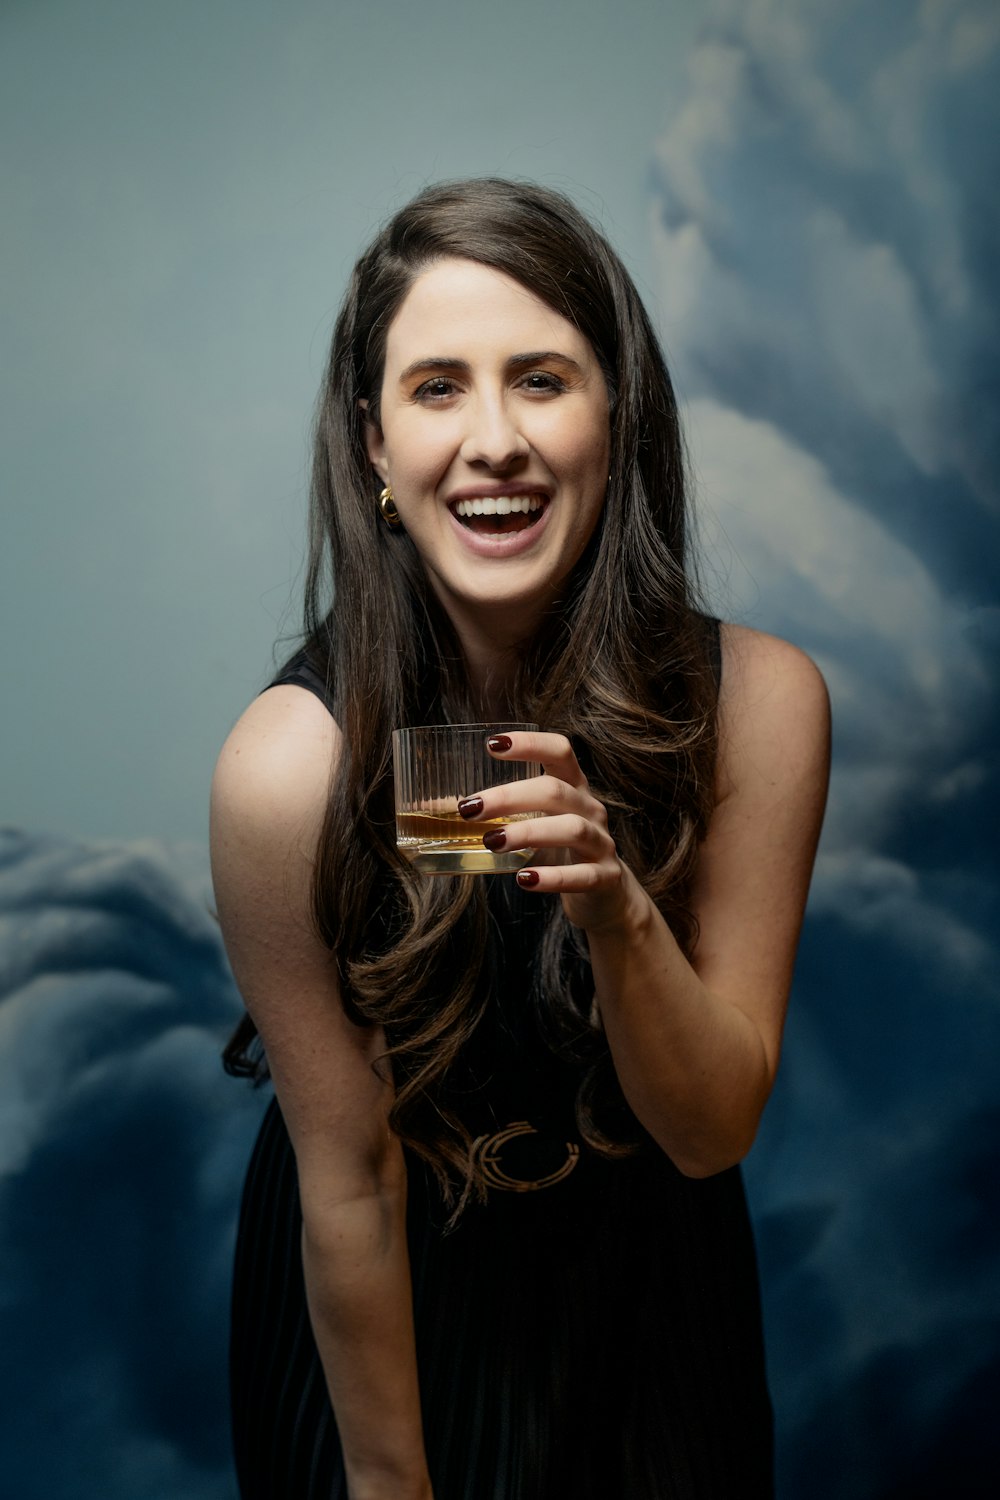 a woman in a black dress holding a glass